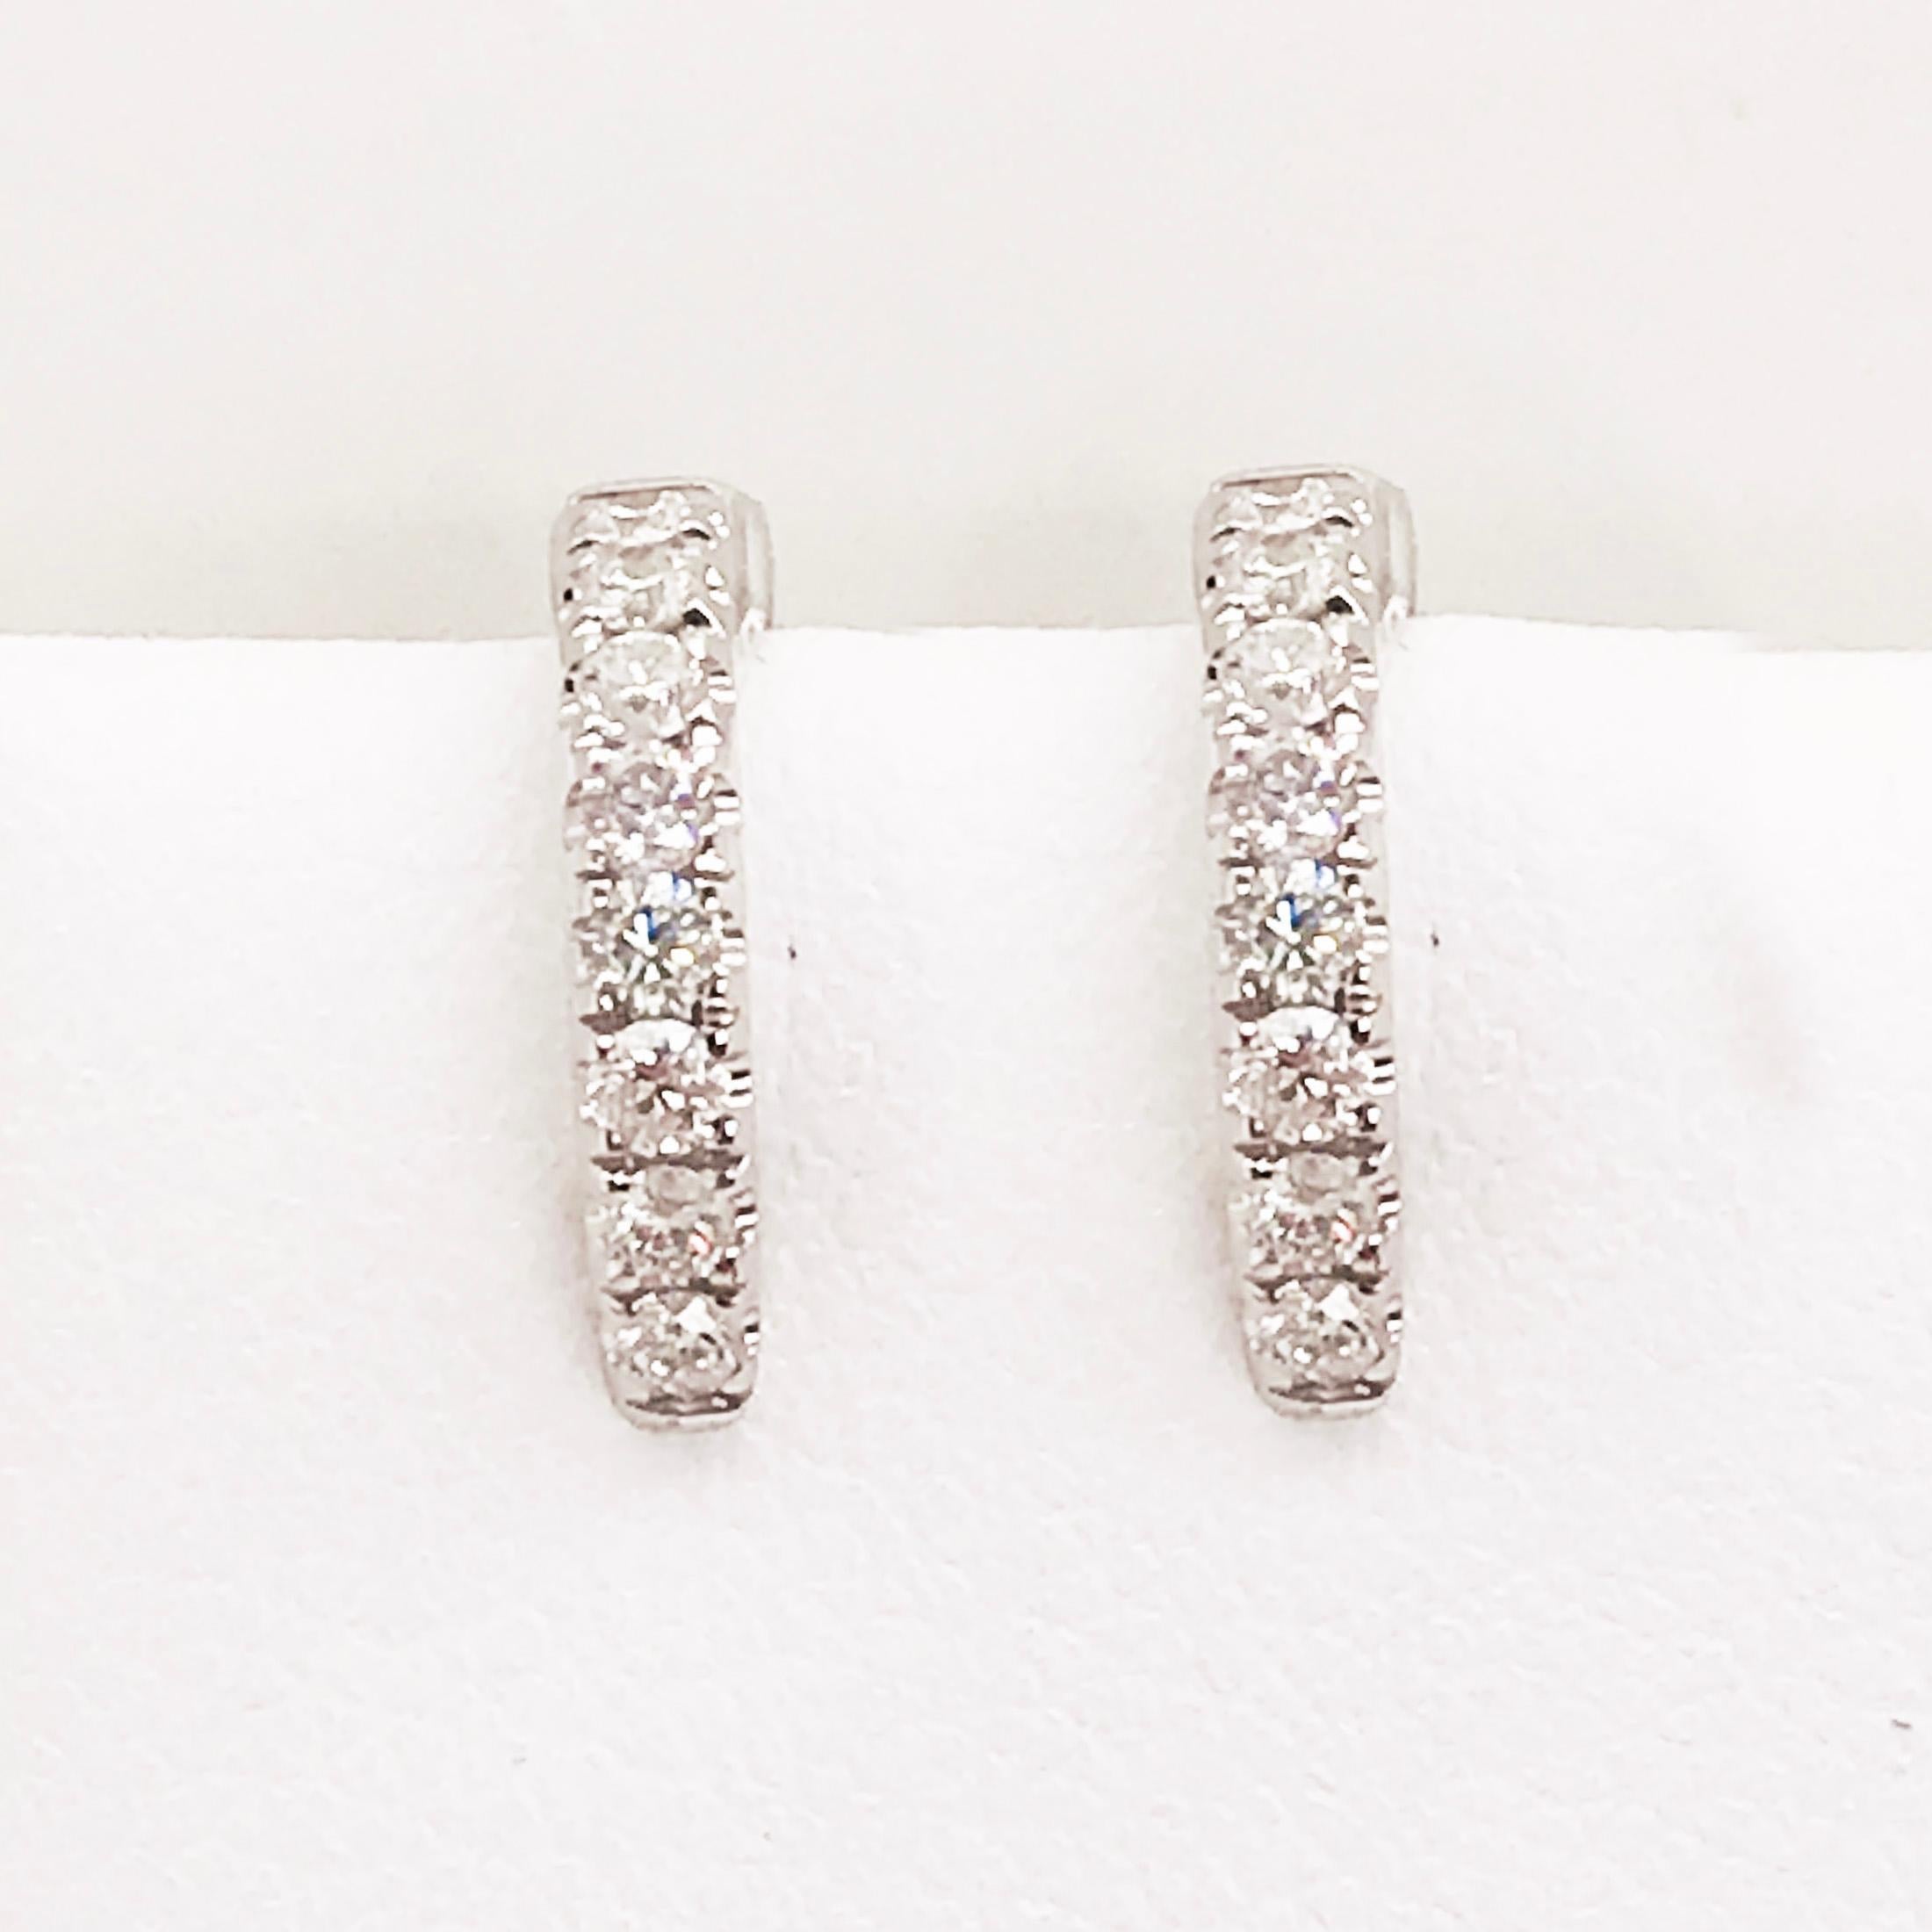 These are 2020 best sellers!  The huggie earrings have beautiful full cut white diamonds that have amazing sparkle and glitter!  These are the details of the huggie earrings:

14K White Gold (Yellow Gold Available)
0.25 Carat Total Diamond Weight